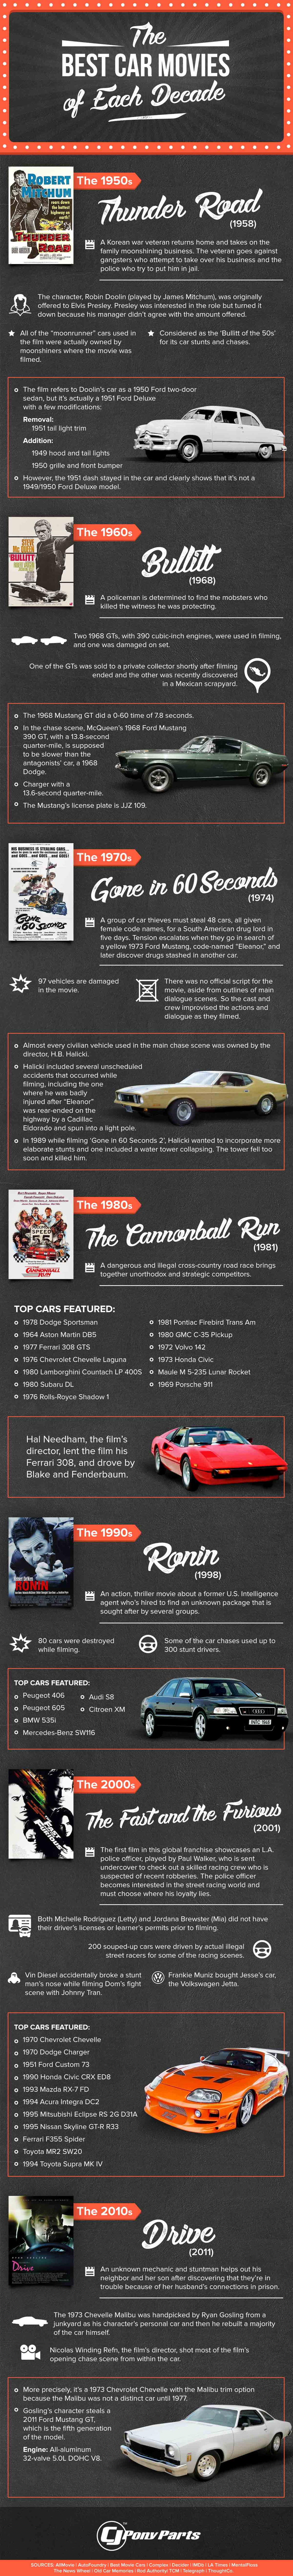 best car movies of each decade infographic